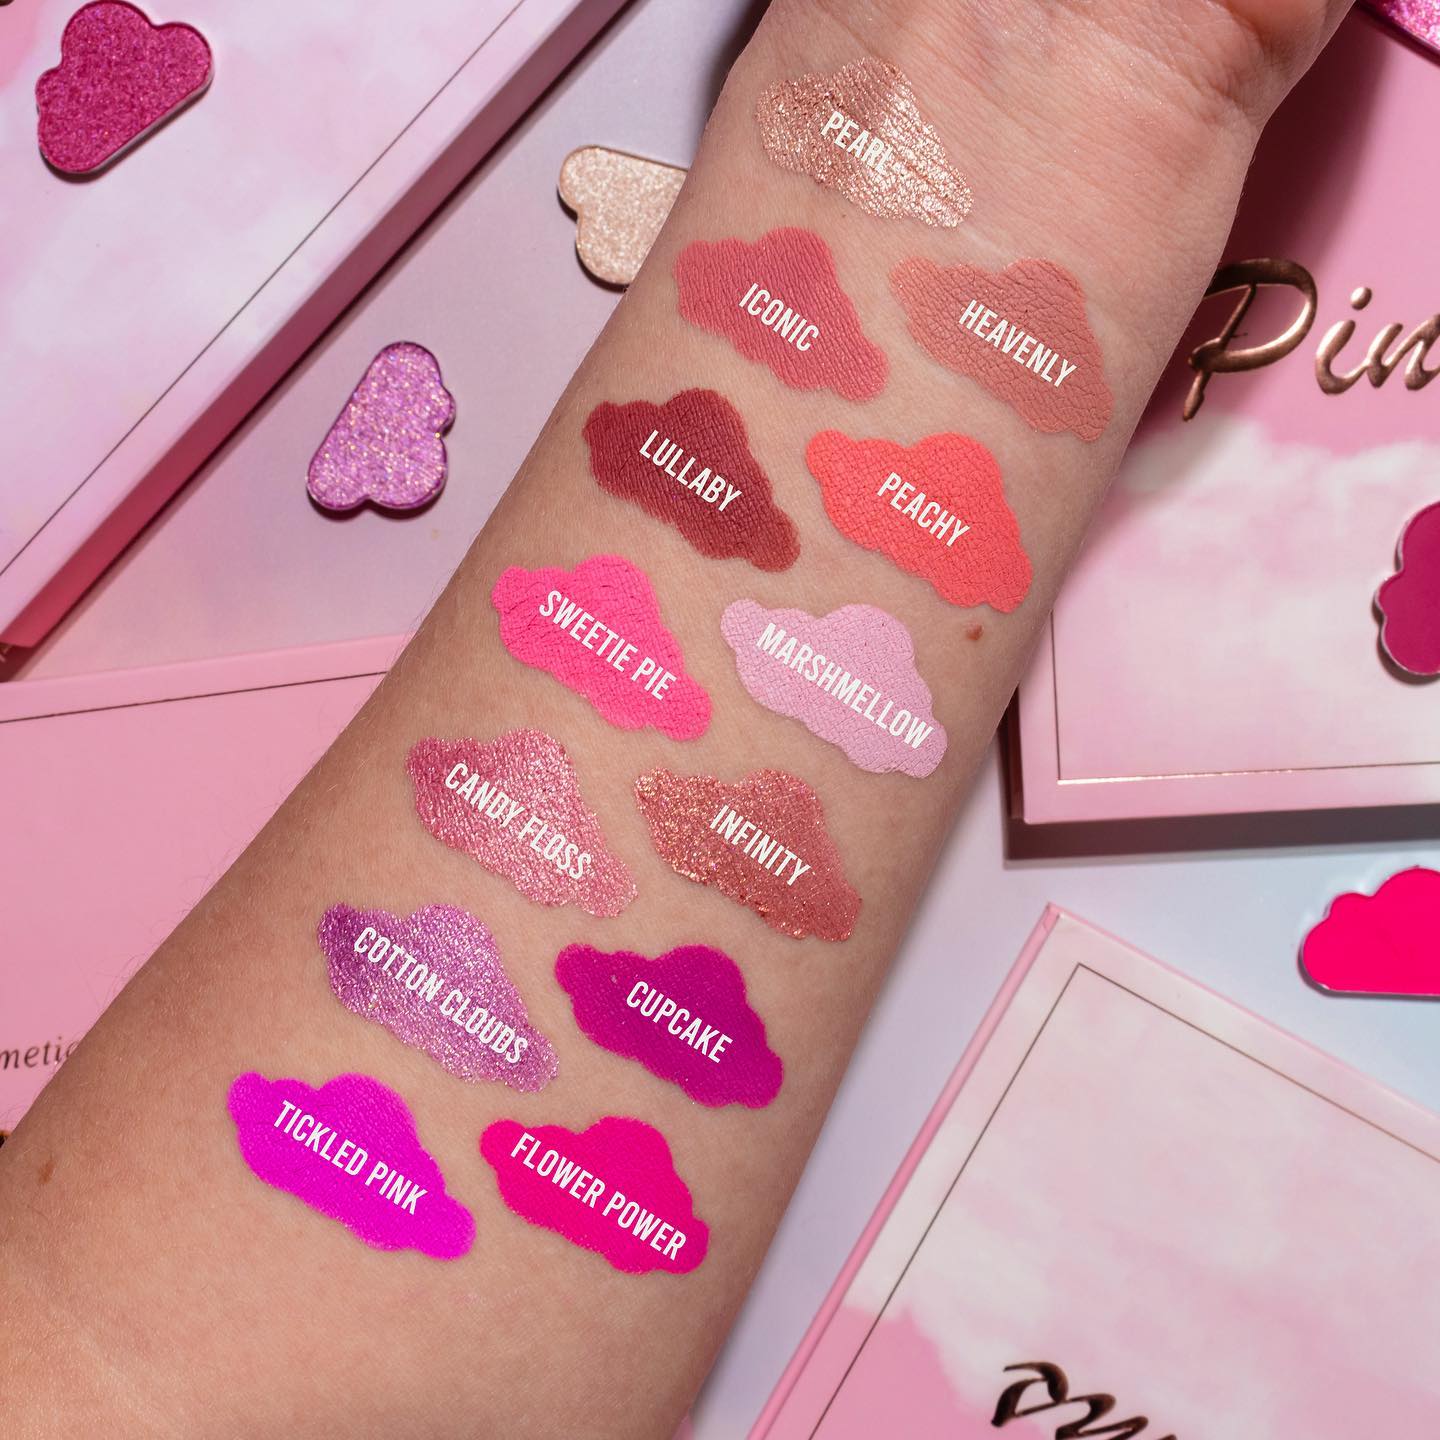 With Love Cosmetics - Pink Dreams Palette